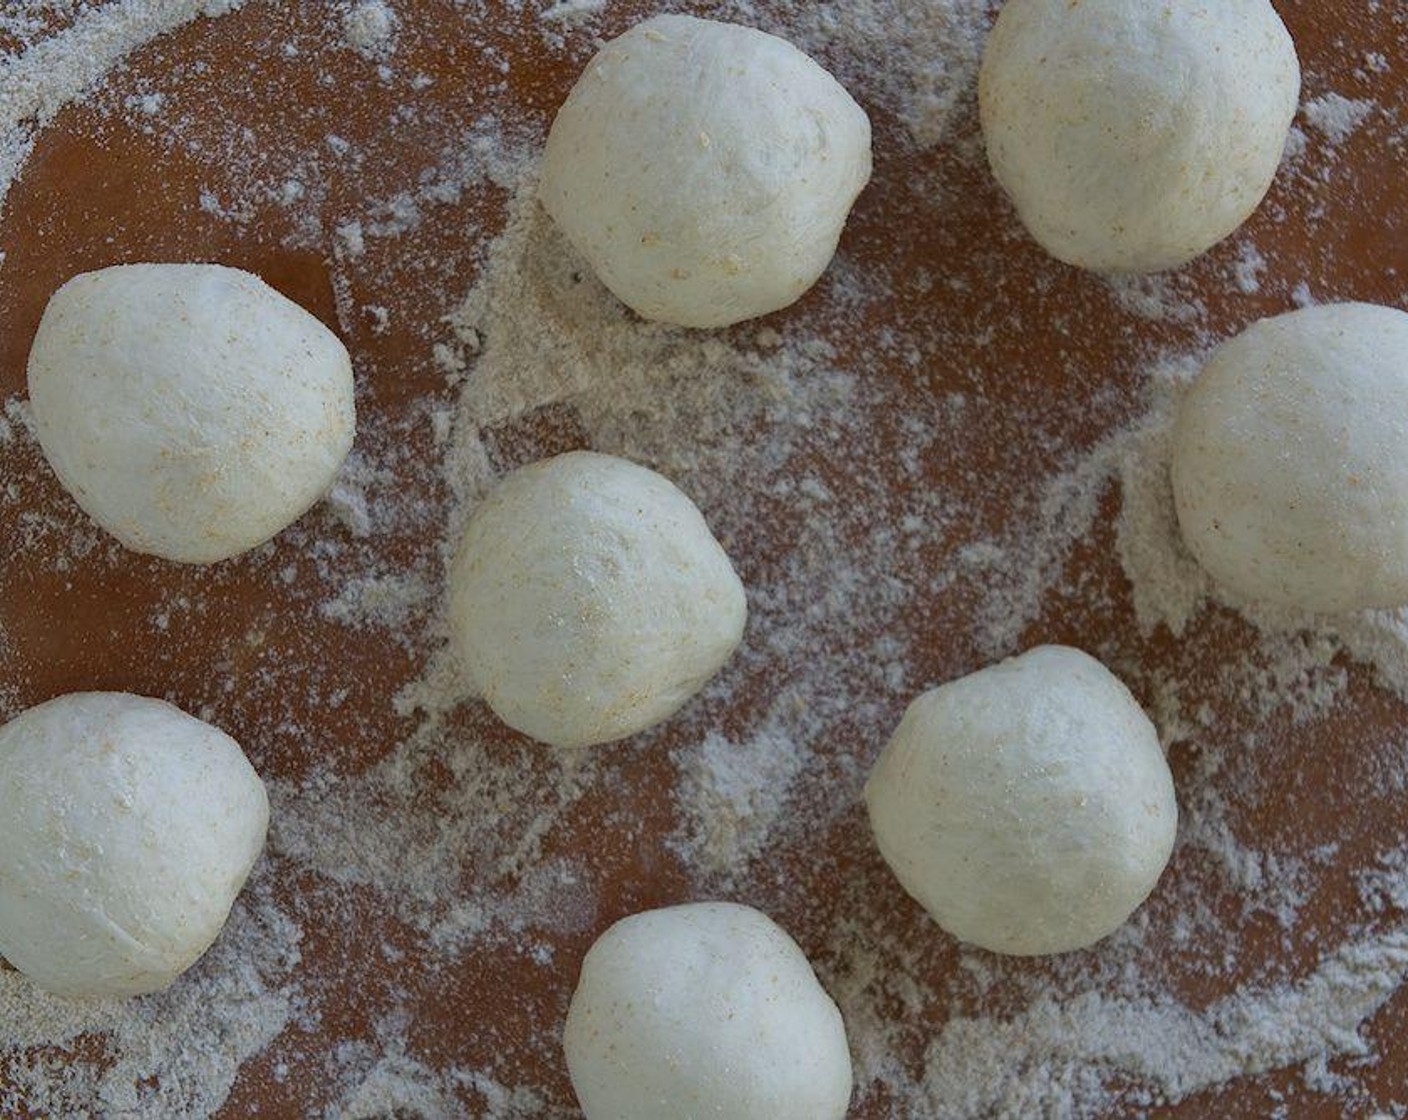 step 2 Prepare your Pizza Dough (10 oz). Divide the dough into 4 balls, quarter each of the 4 balls, then cut in half again (each ball gives you 8 pieces). Roll each piece into a circle. Pinch the edges to form triangles. Place on a baking sheet.